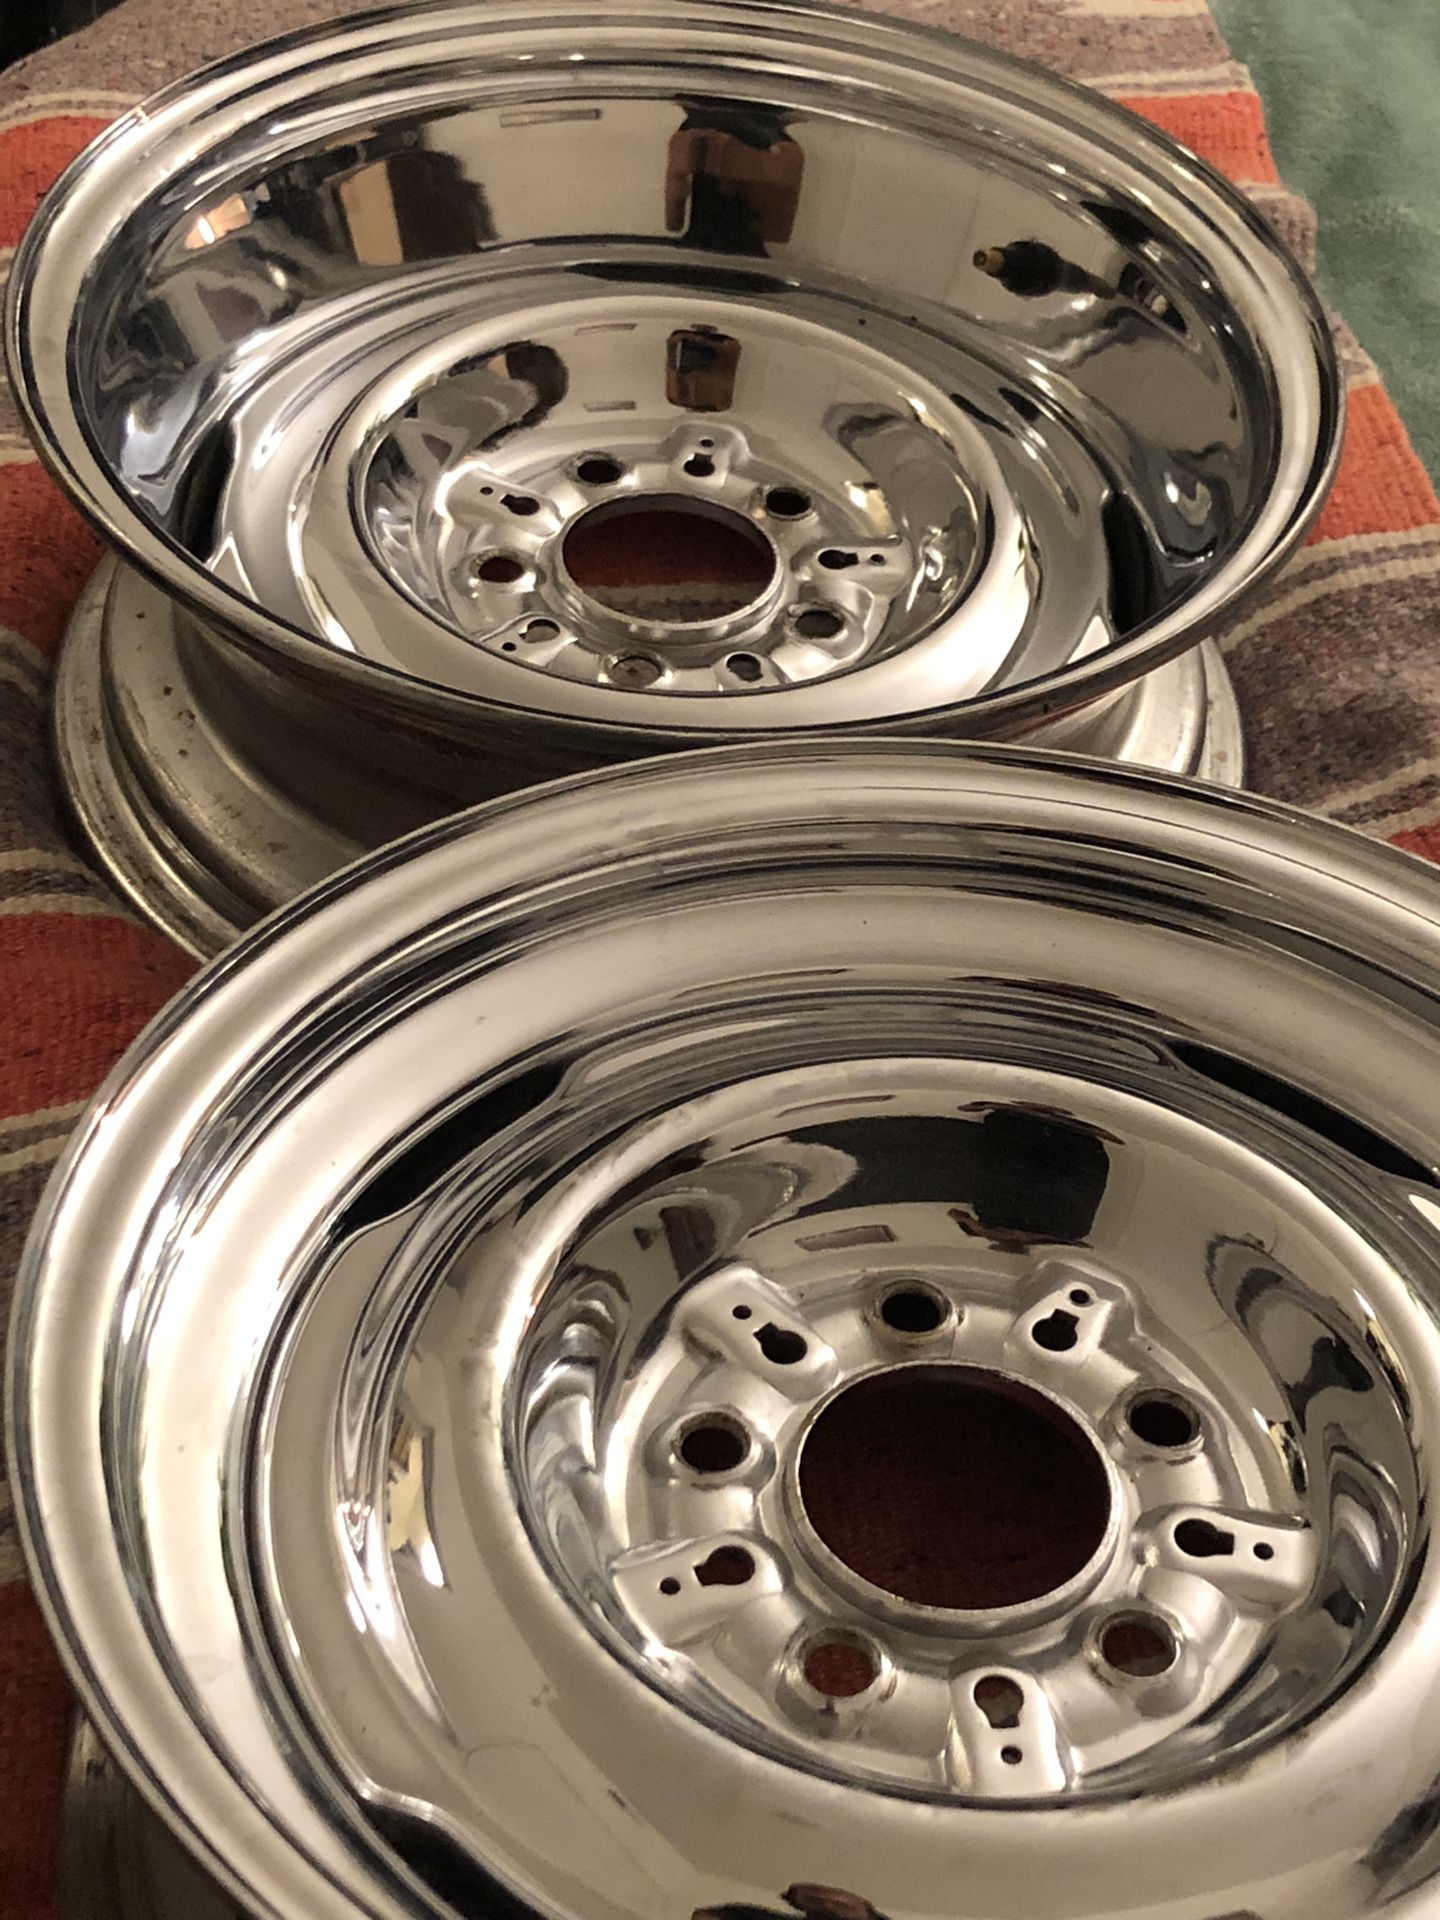 Chrome Steelies - Flipped & Dished 15inch 5x114.3 Or 5x4.5 Bolt Pattern - Kelsey-Hayes Hot Rod Wheels